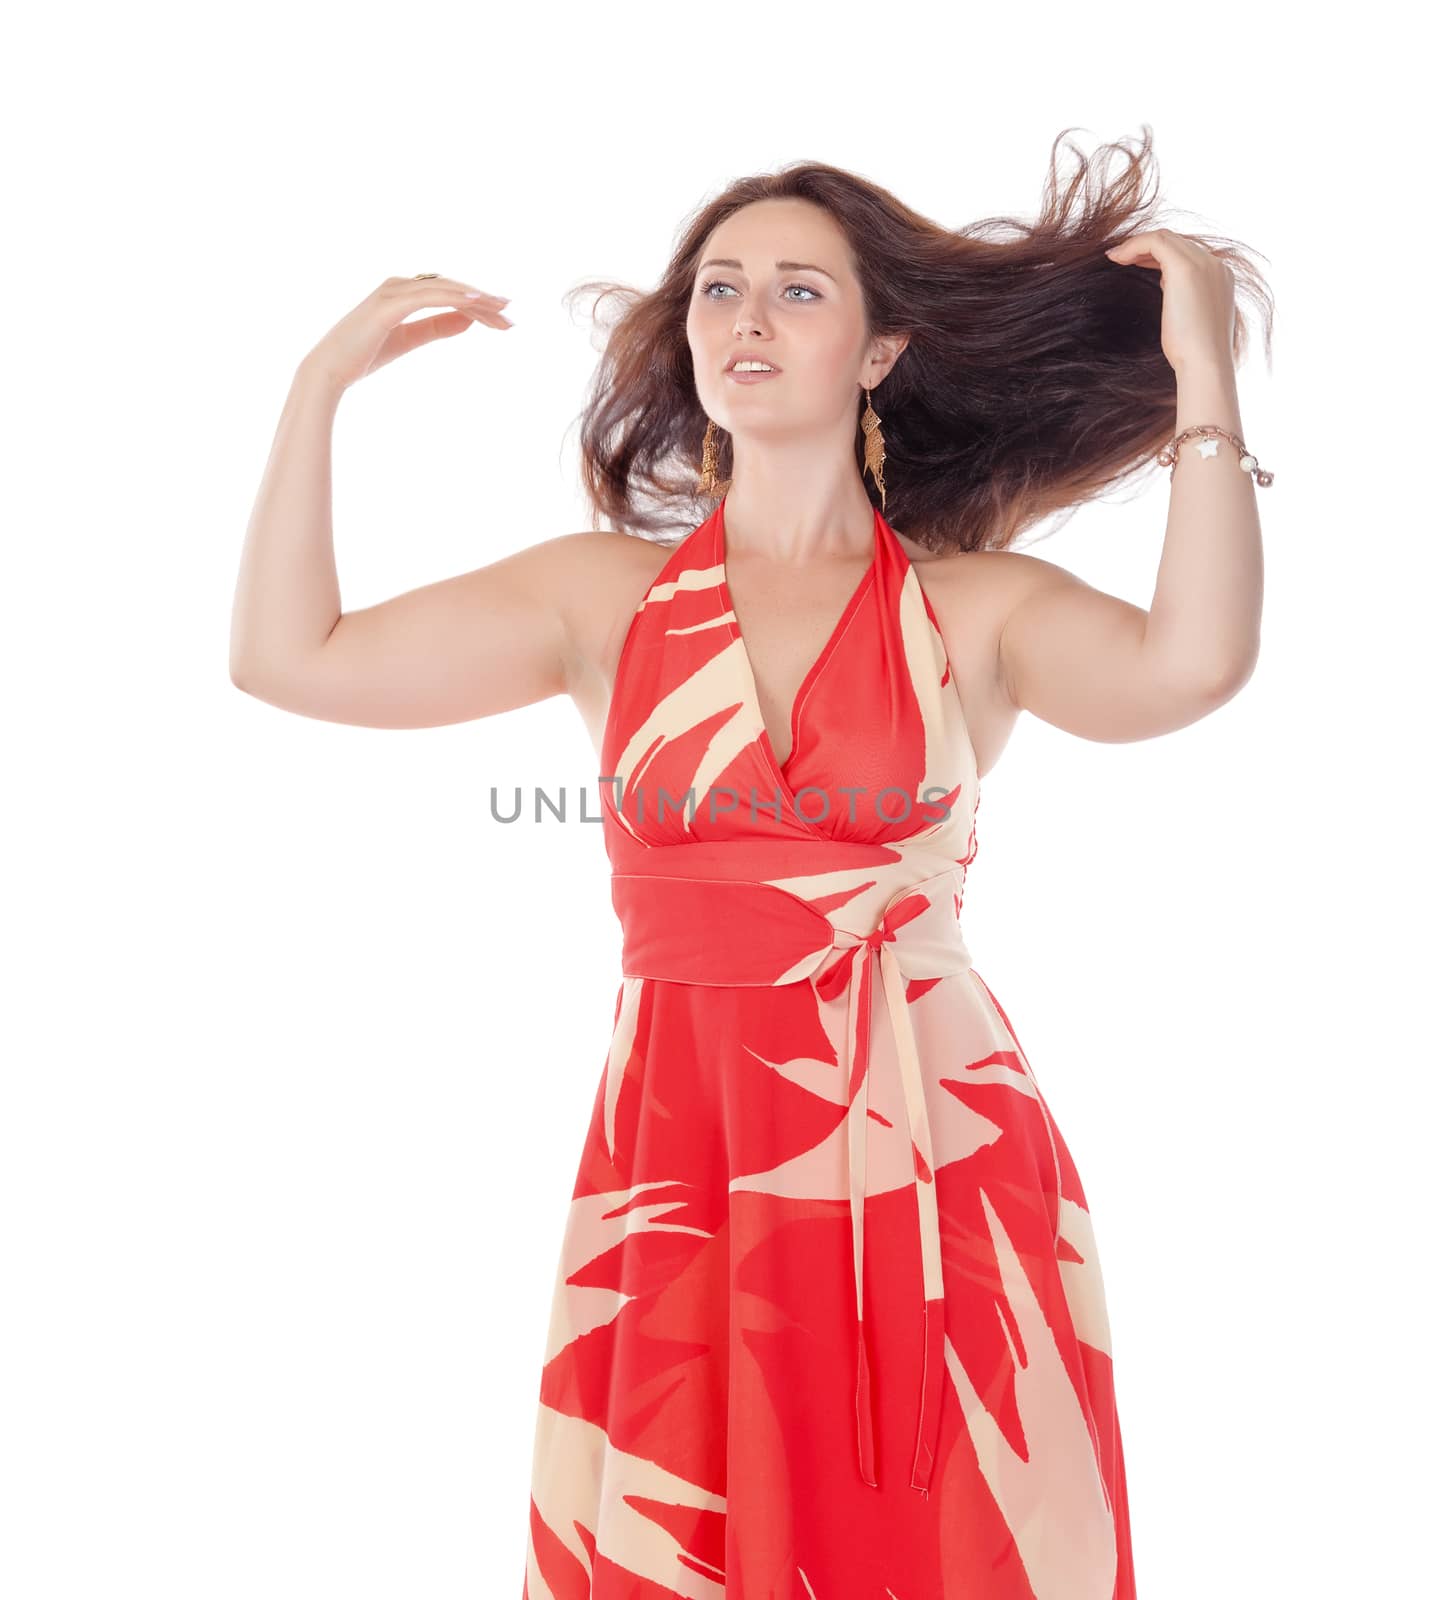 Portrait of a smiling young woman in red dress on white background